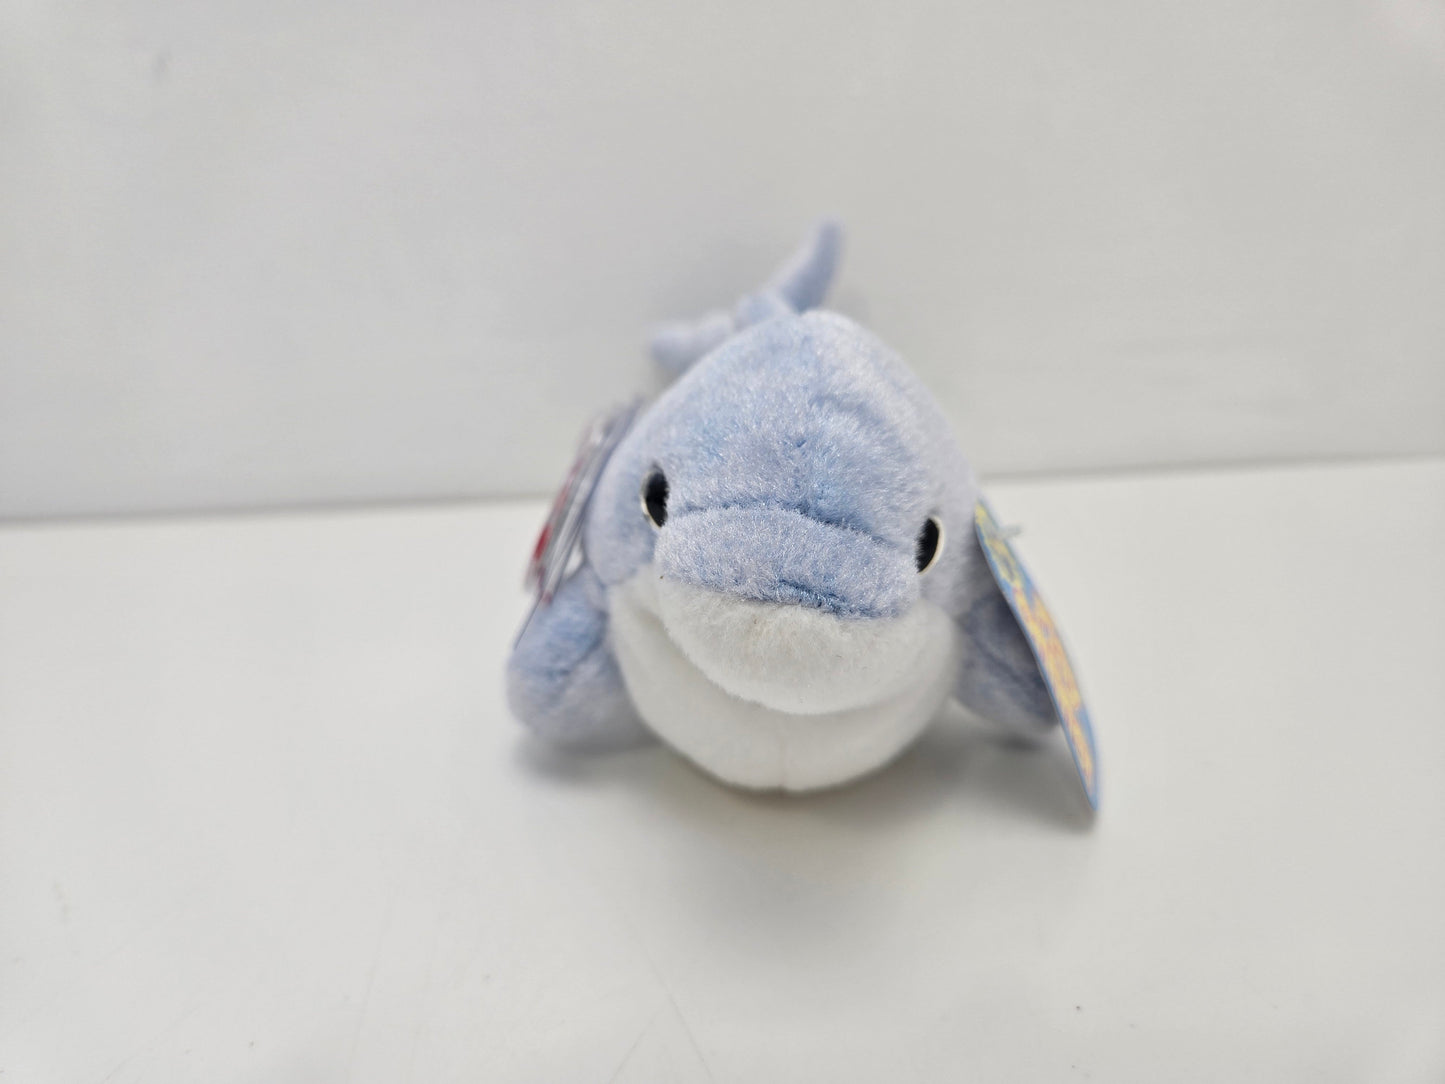 Ty Beanie Baby 2.0 “Clipper” the Dolphin (8 inch)